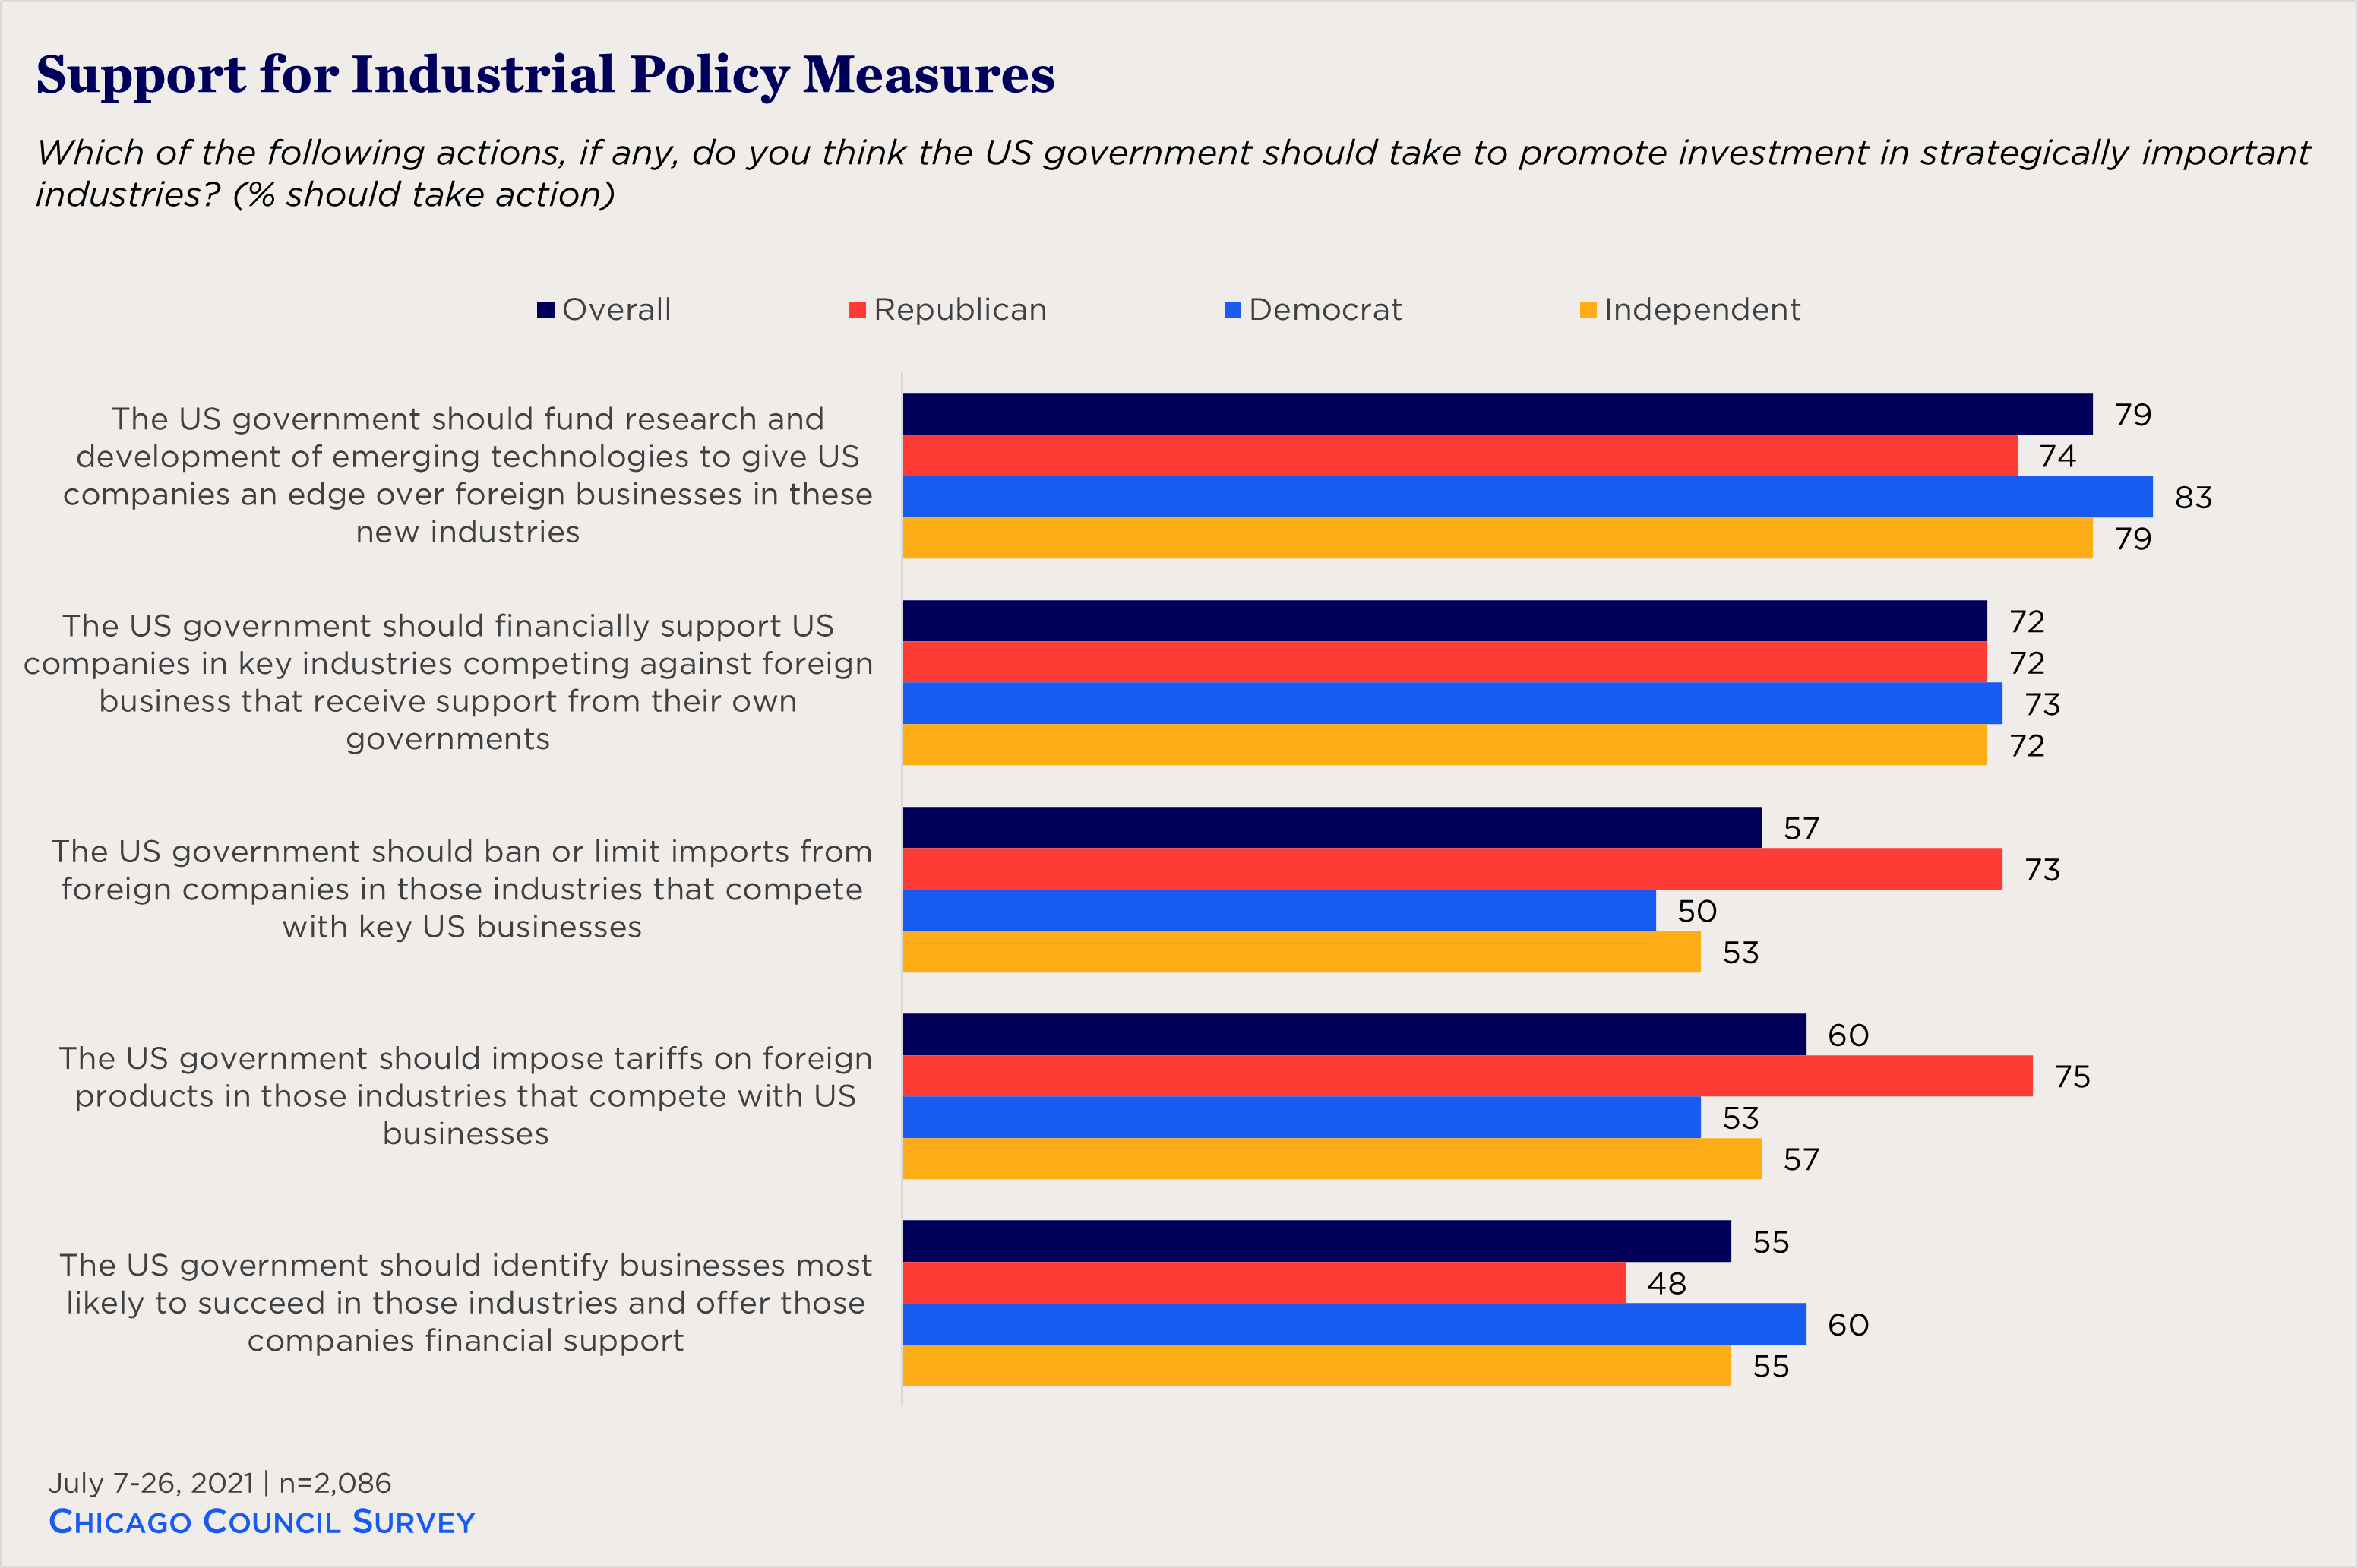 bar chart showing support for industrial policy measures